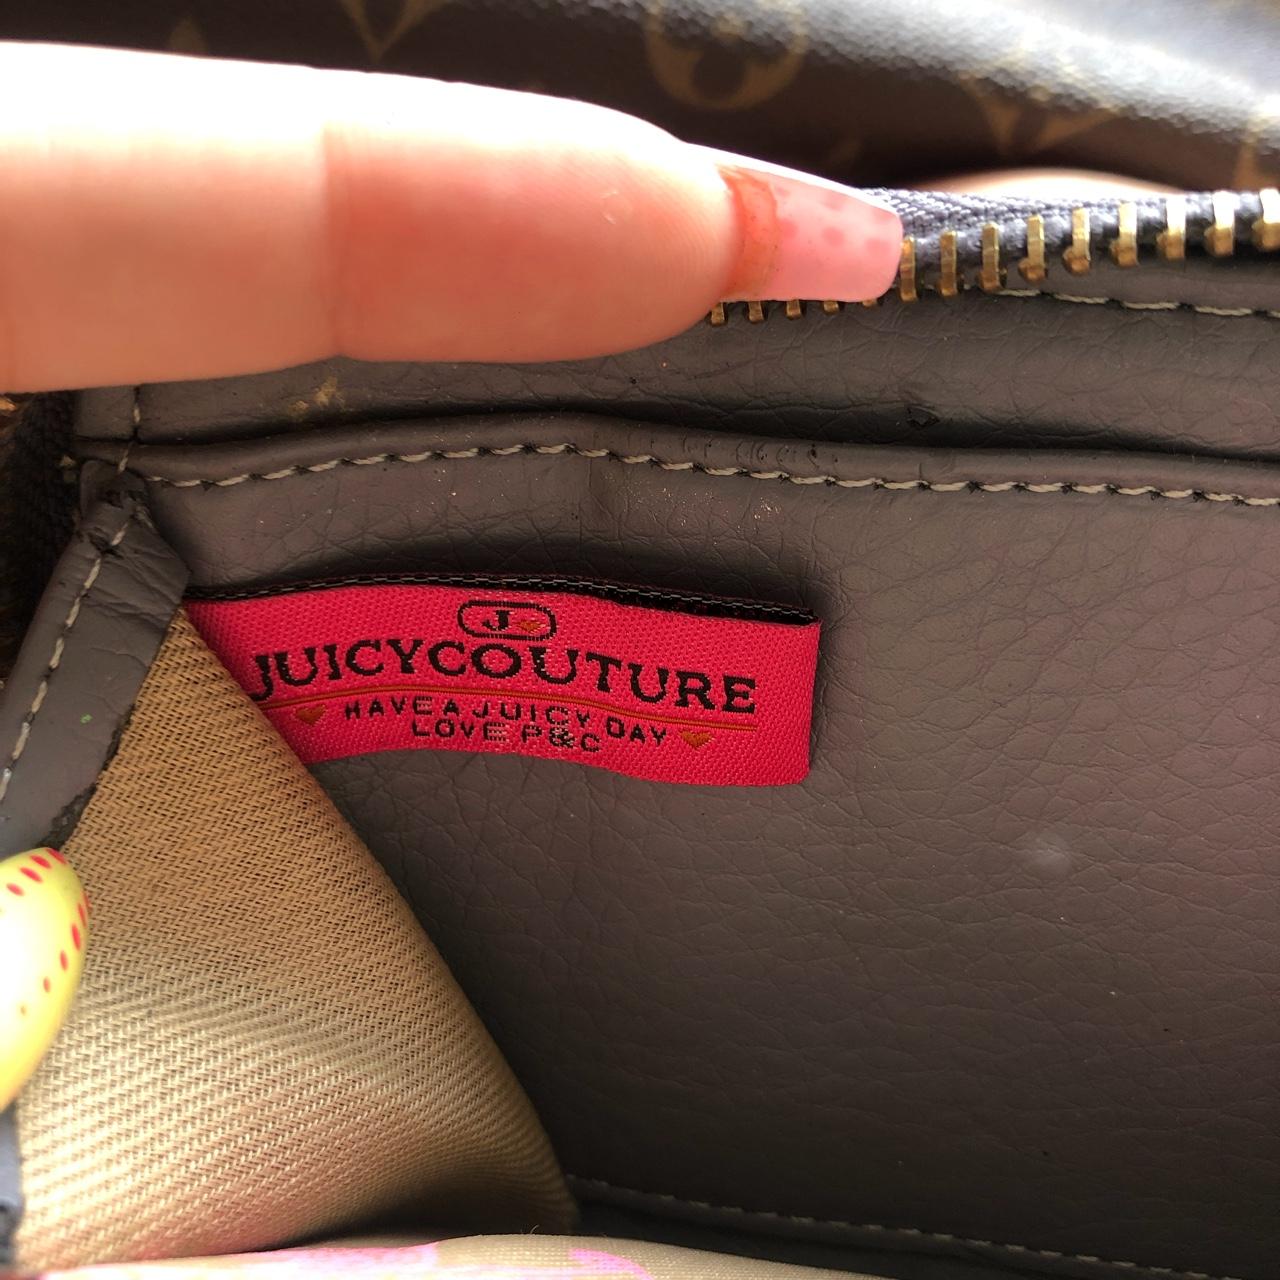 Juicy Couture Women's Pink and Grey Bag | Depop